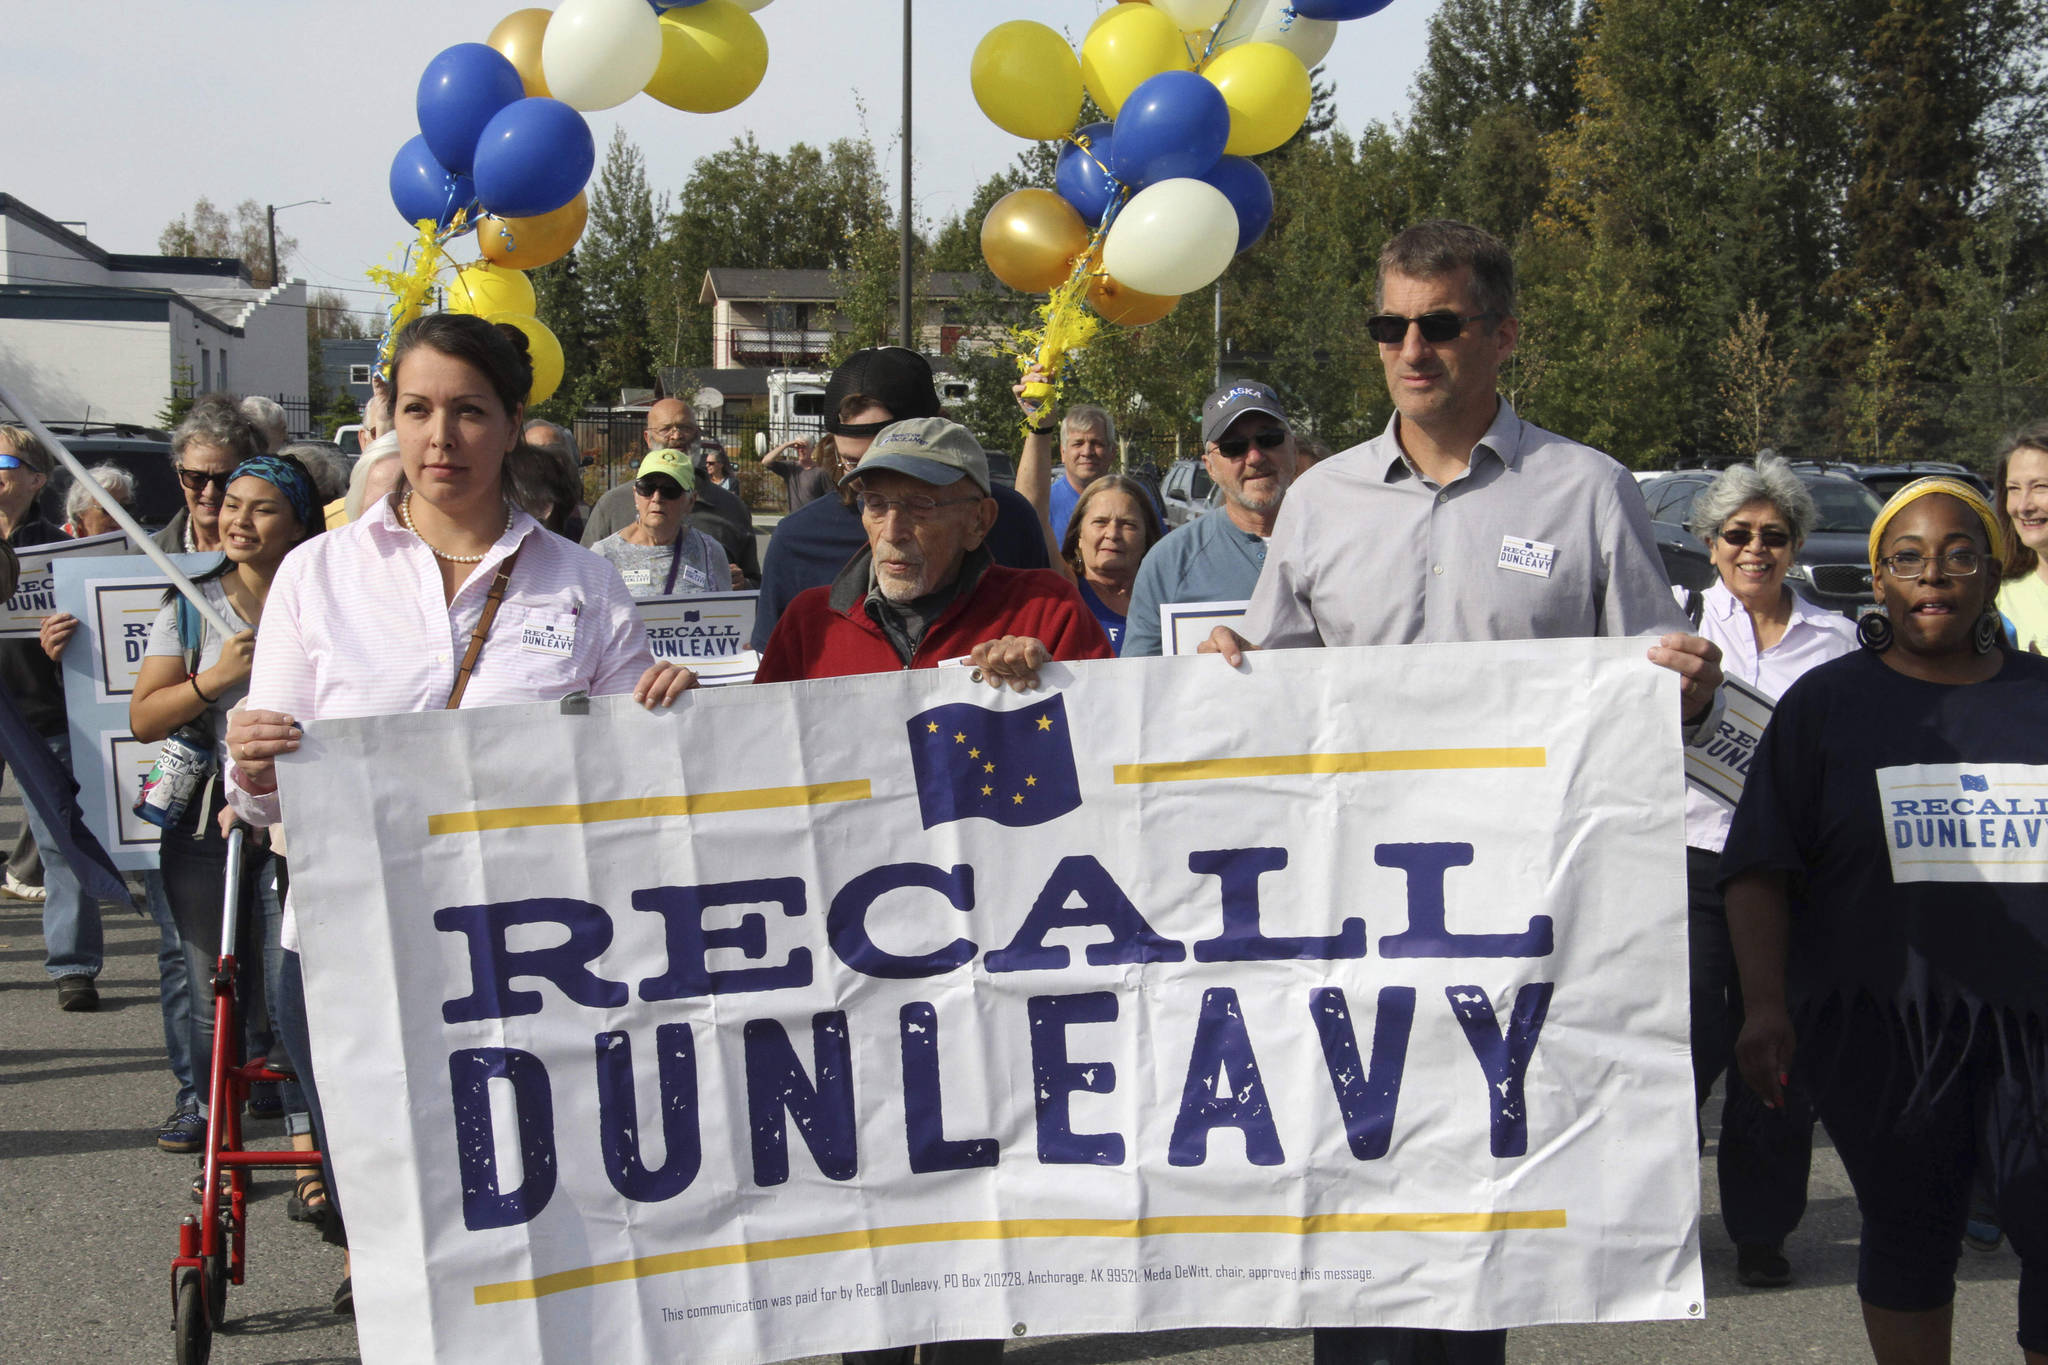 In this Sept. 5, 2019, file photo, Meda DeWitt, left, Vic Fischer, middle, and Aaron Welterlen, leaders of an effort to recall Alaska Gov. Mike Dunleavy, lead about 50 volunteers in a march to the Alaska Division of Elections office in Anchorage, Alaska. The campaign aimed at recalling Alaska Gov. Dunleavy says it is ceasing that effort, with a gubernatorial election looming next year. The Recall Dunleavy group says as of Saturday, Aug. 21, it had gathered 62,373 signatures, shy of the 71,252 needed for a recall election. (AP Photo/Mark Thiessen, File)